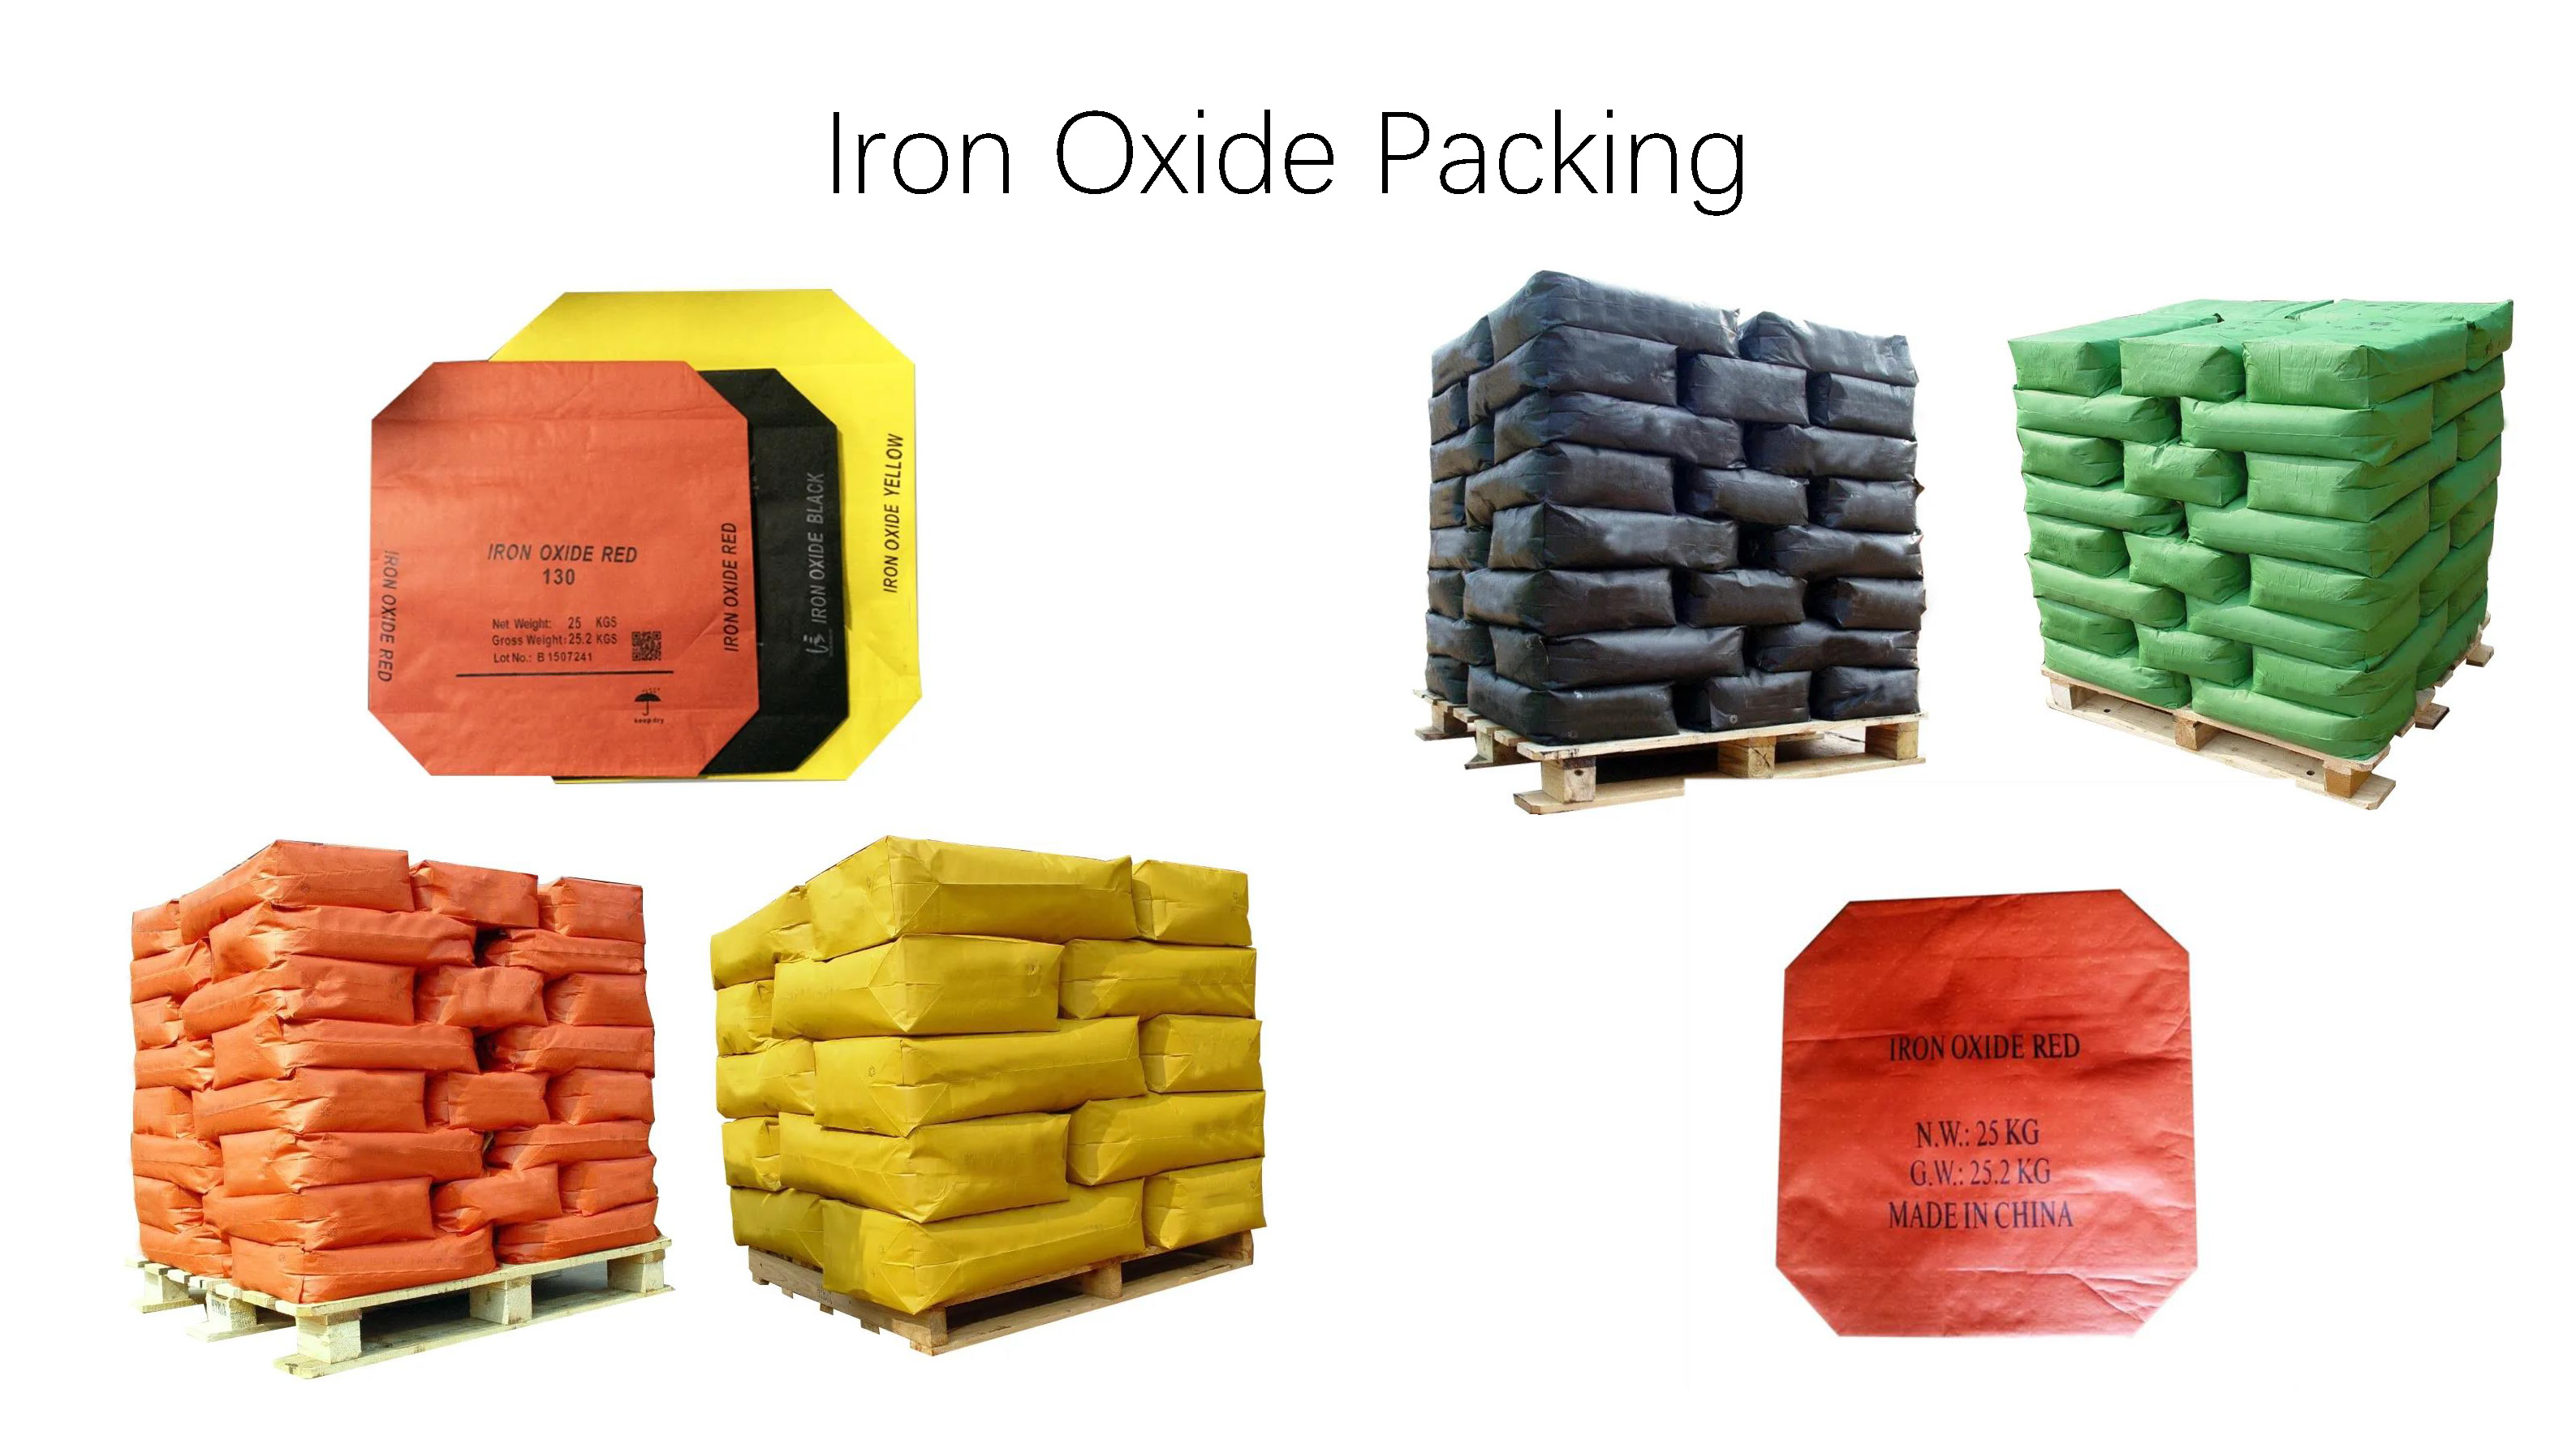 Iron Oxide Red 130 and Yellow 313